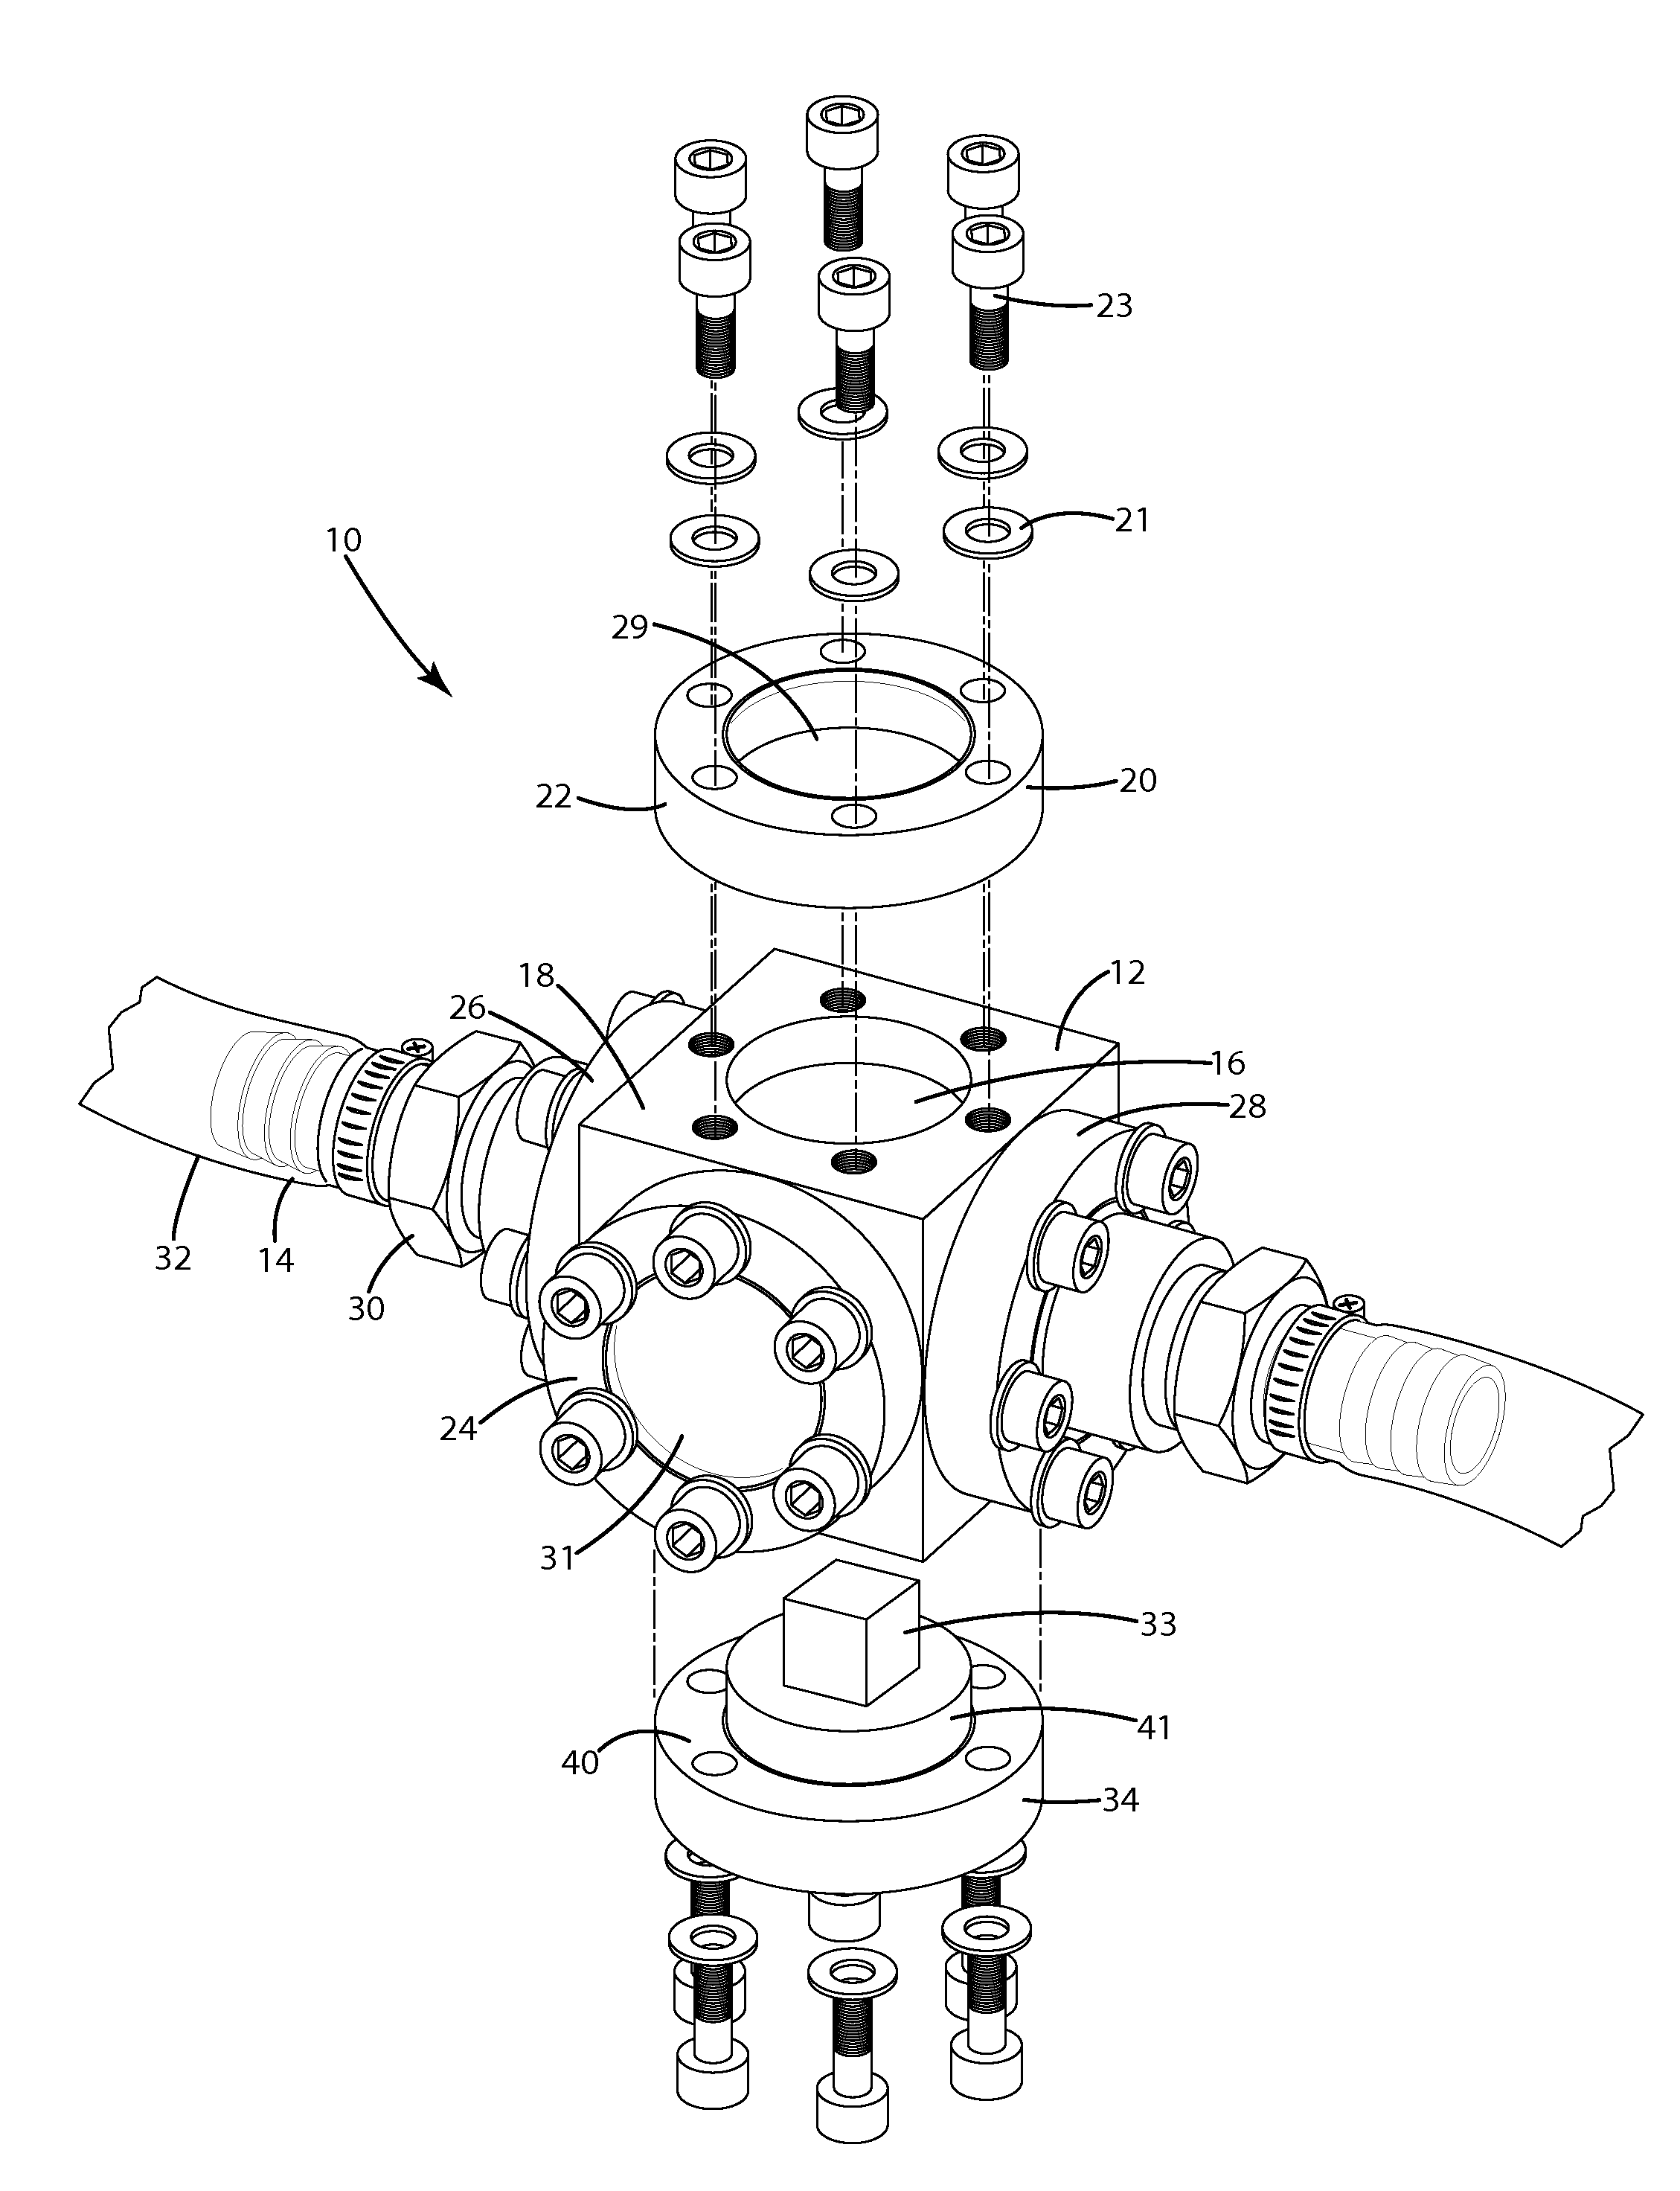 Repetitive pressure-pulse apparatus and method for cavitation damage research